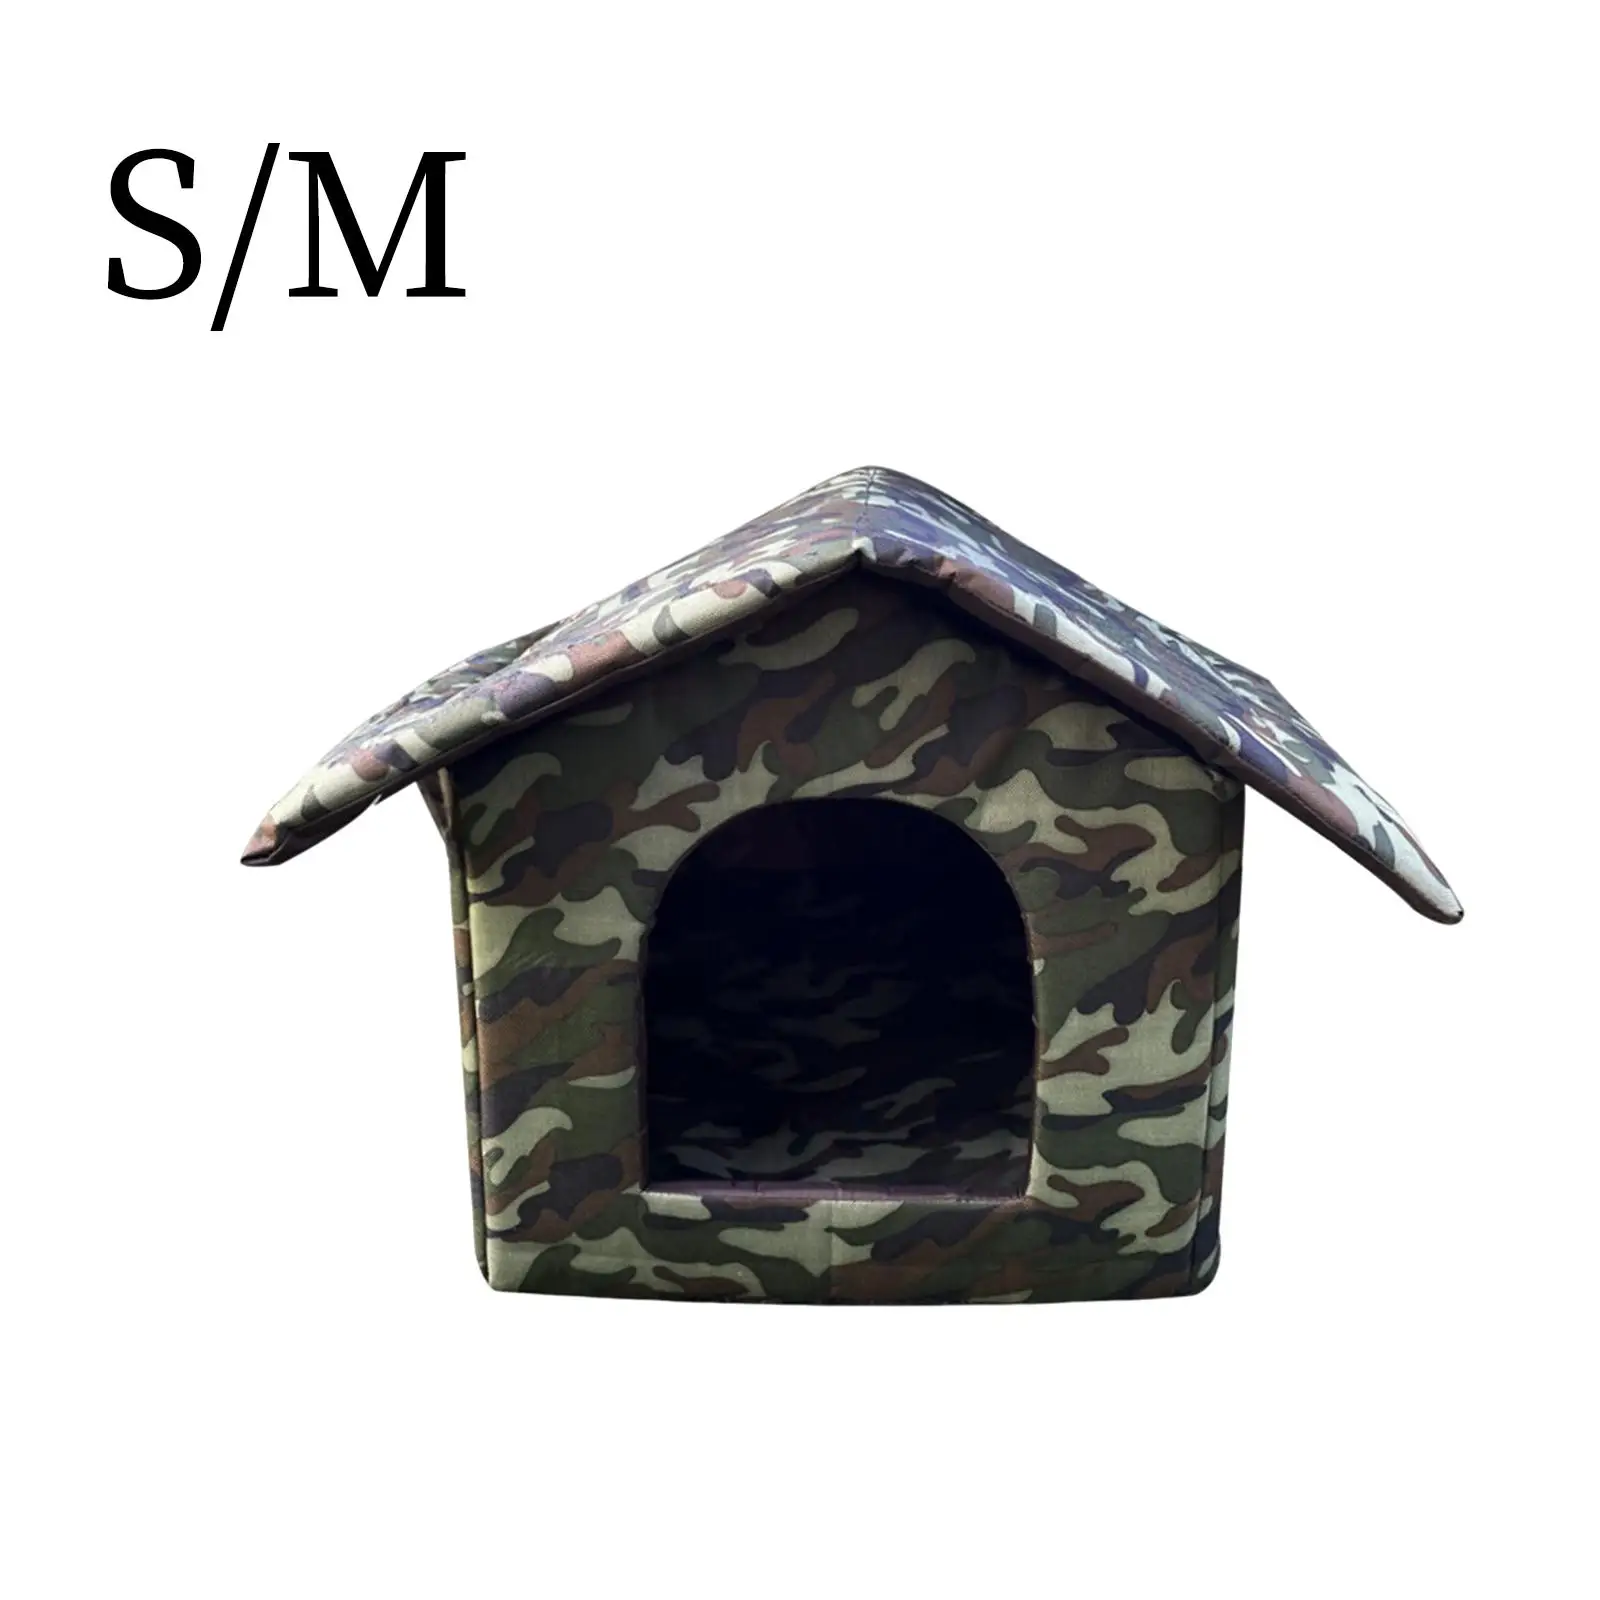 Outdoor Waterproof Cat House Weatherproof with Removable Cushion and Roof